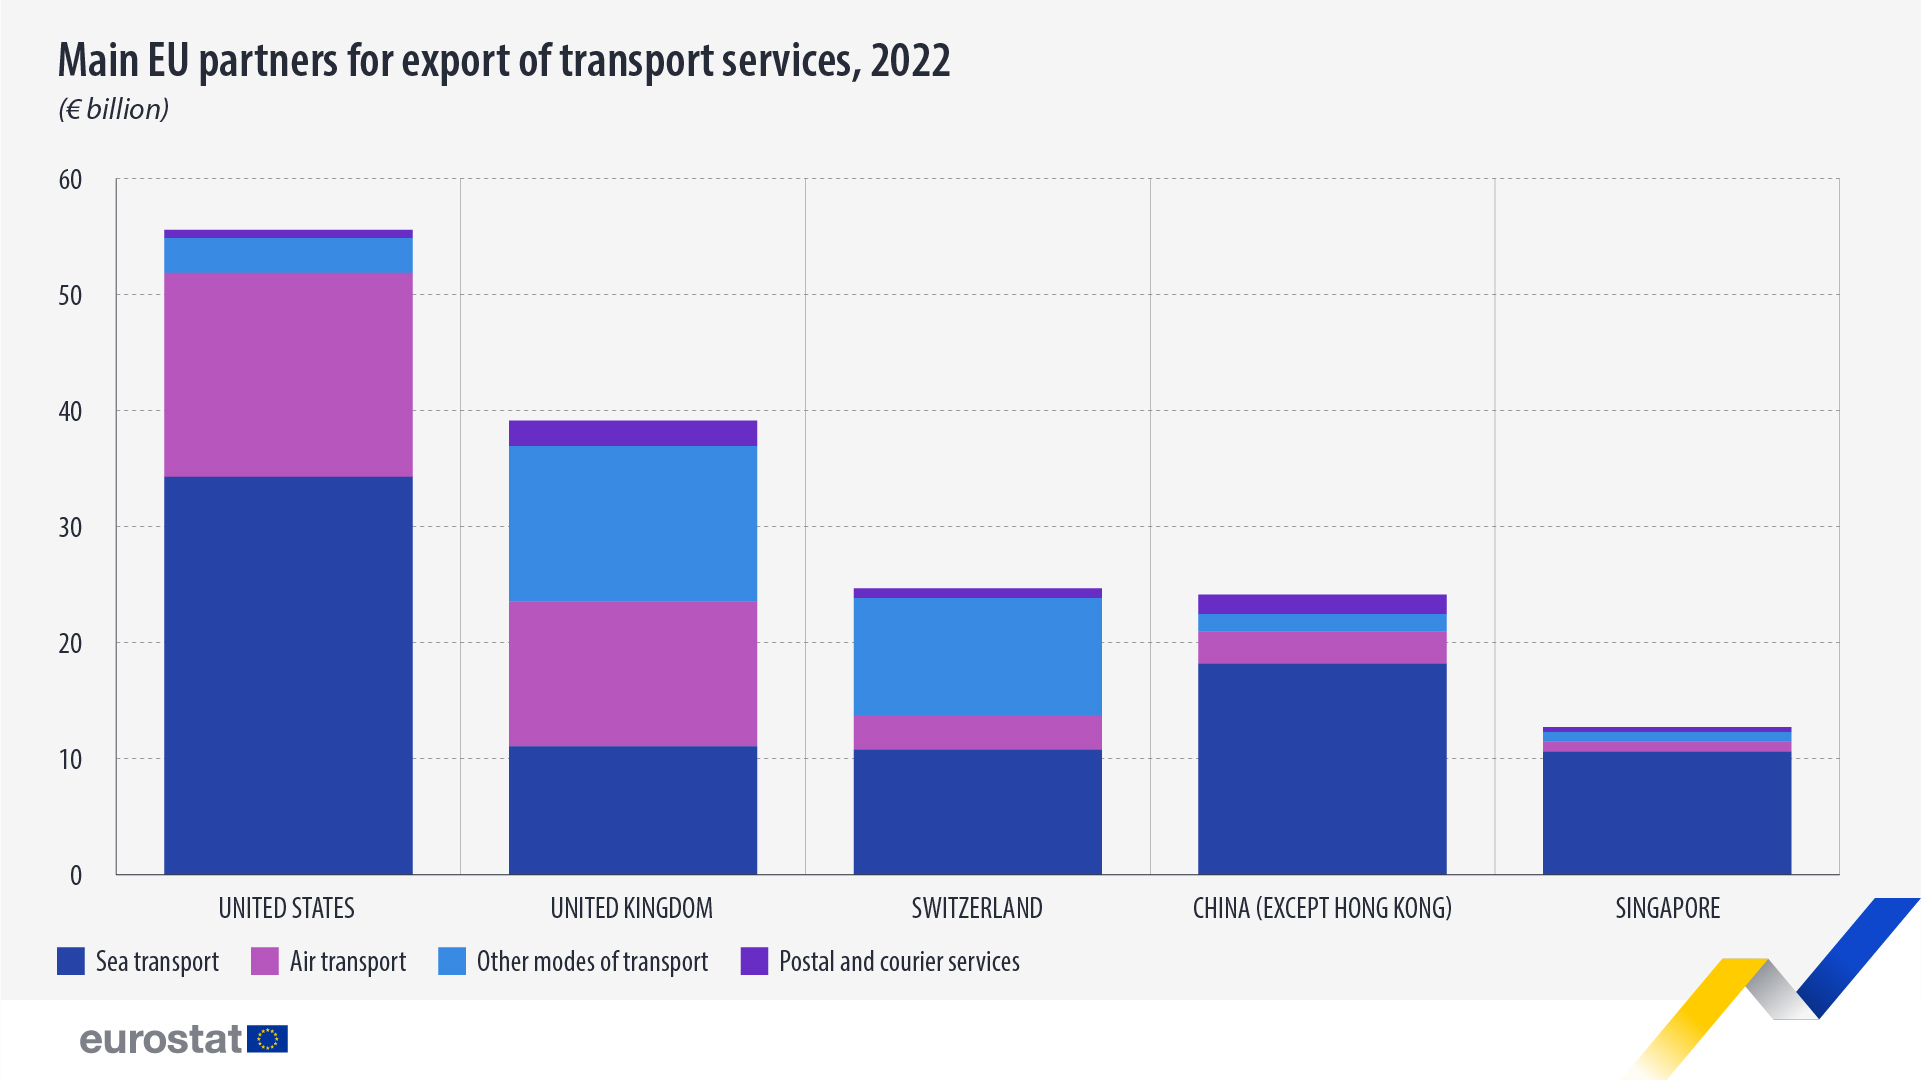 Main EU partners for exports of transport services, 2022, € billion. Chart. See link to full dataset below.